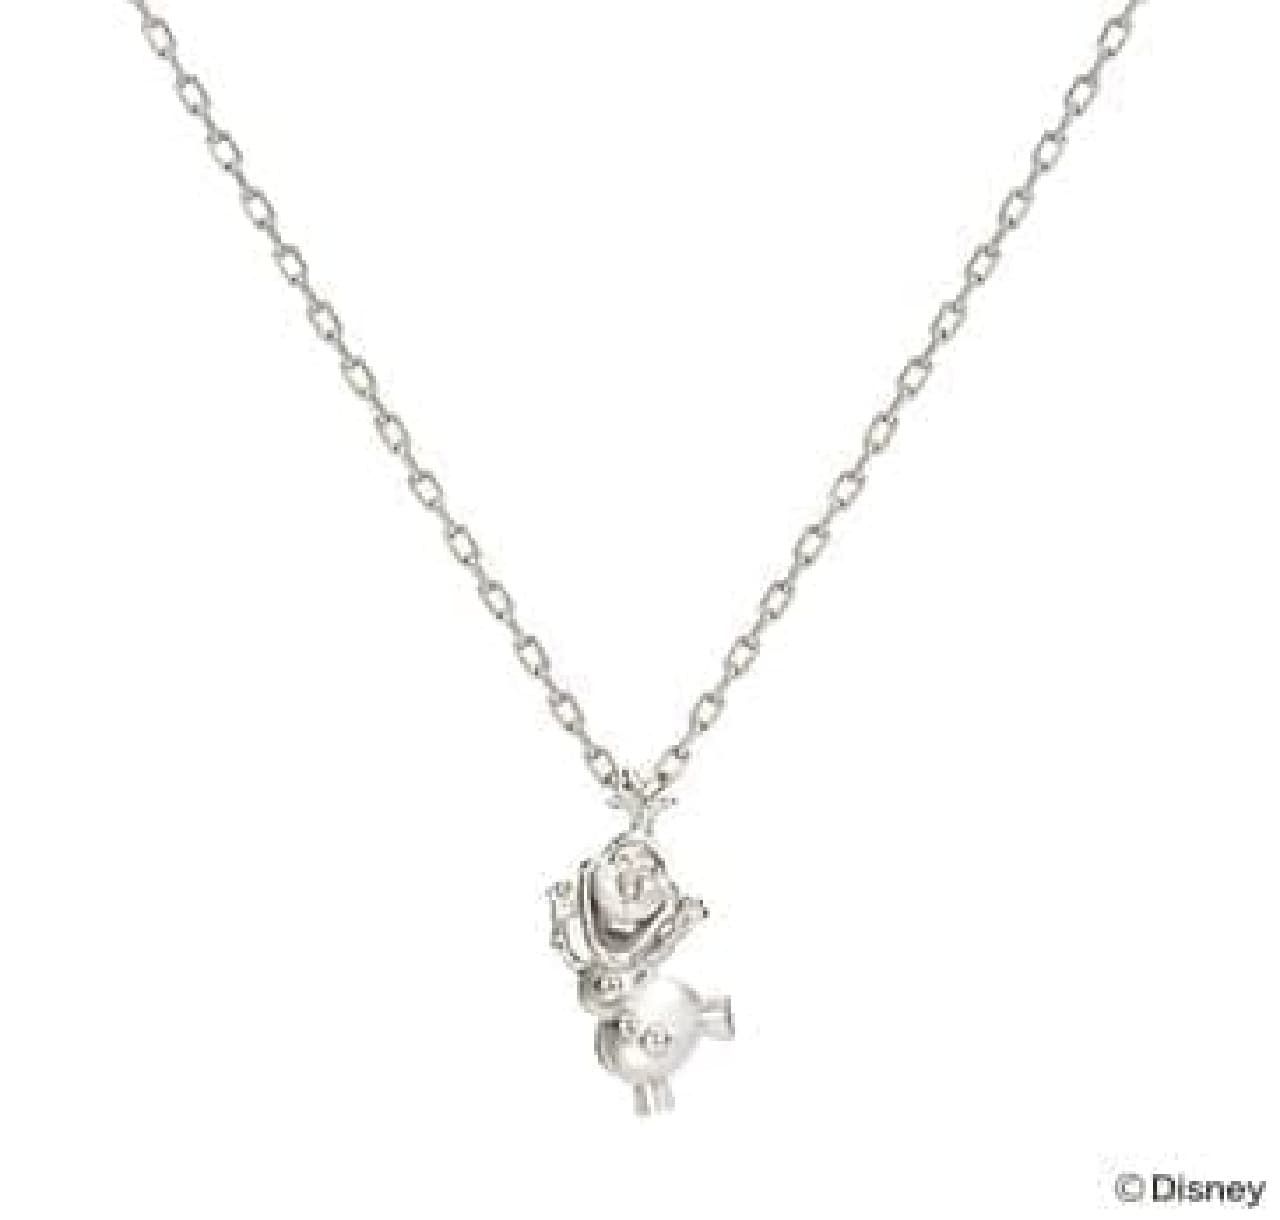 Energetic Olaf necklace (8,800 yen, SV950)